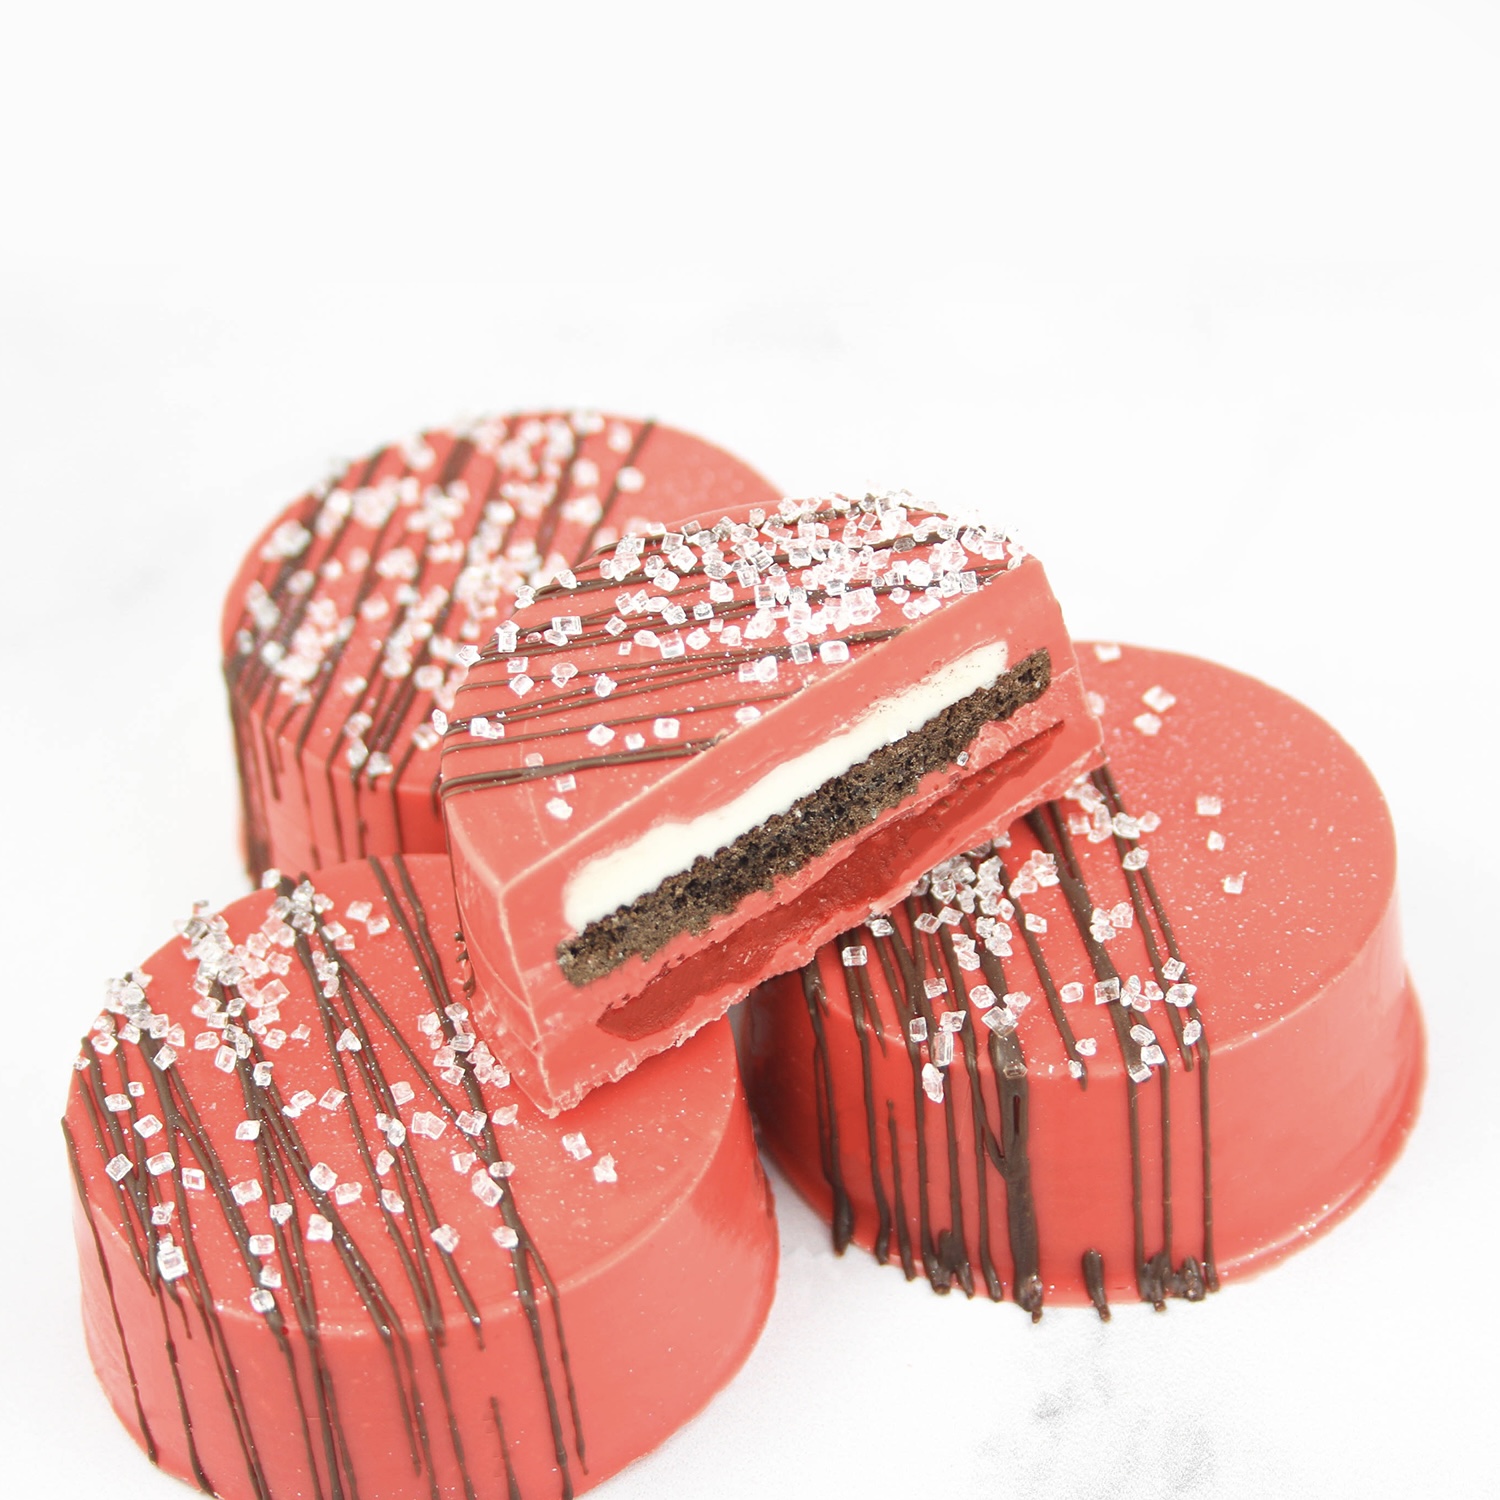 sliced red velvet chocolate dipped oreo to show interior